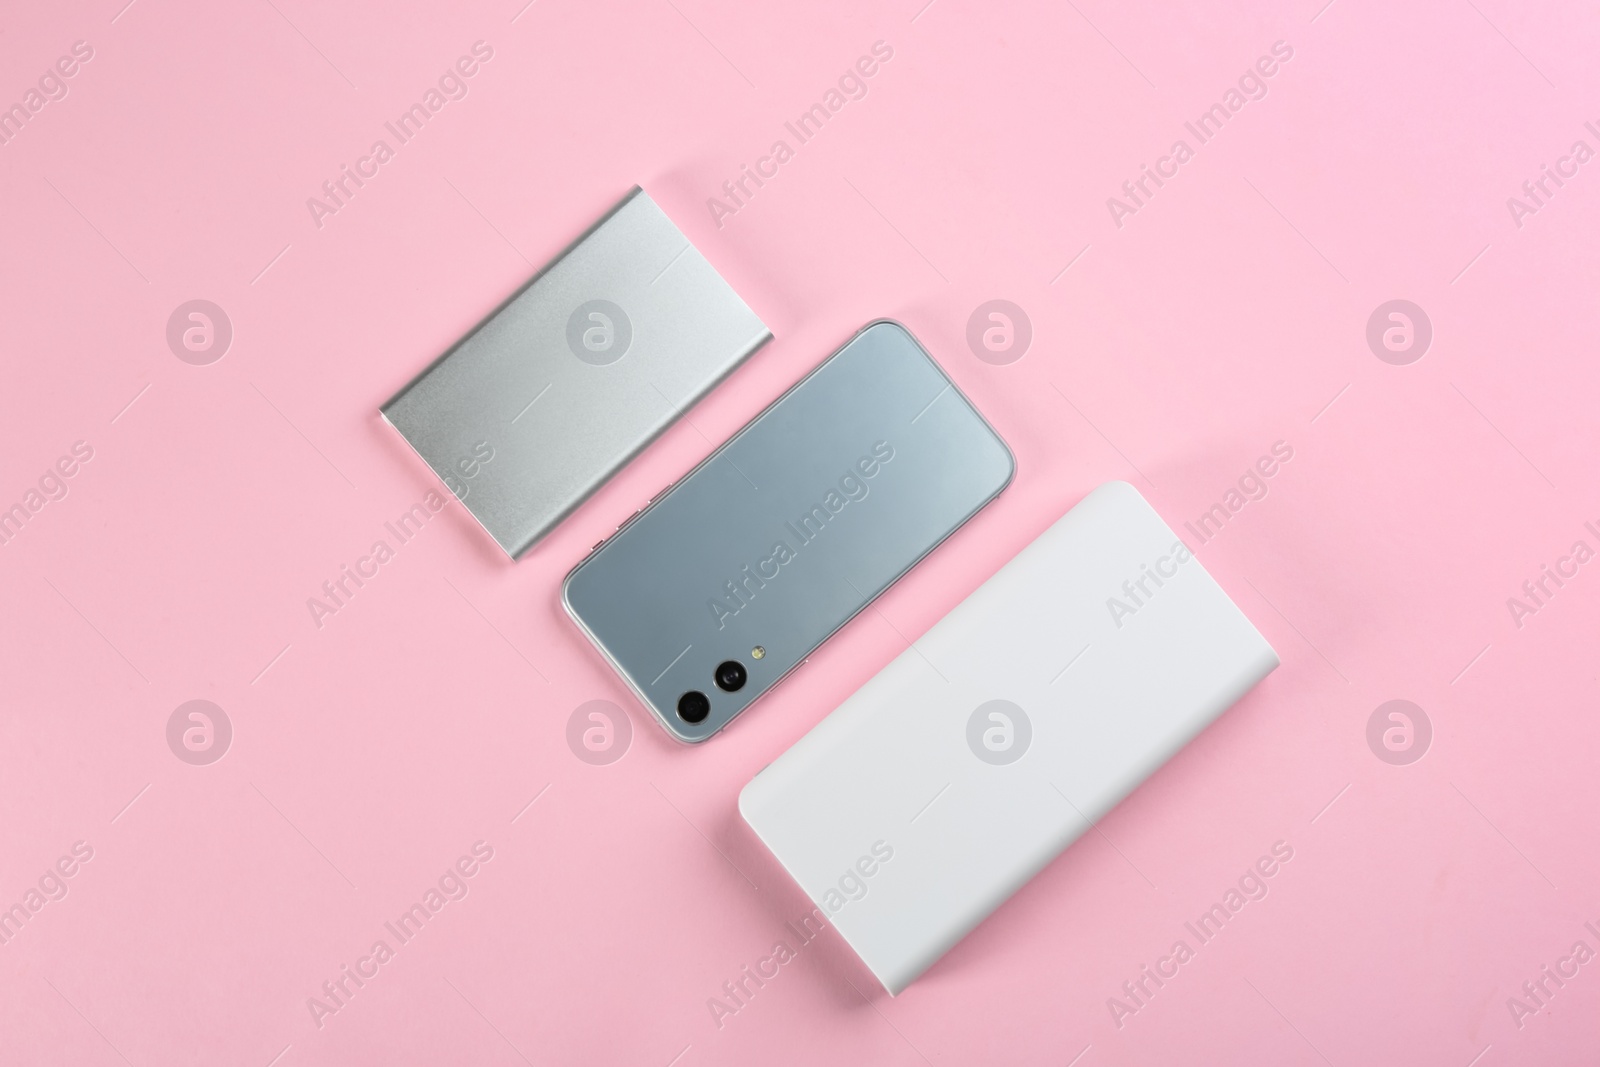 Photo of Mobile phone and portable chargers on pink background, flat lay